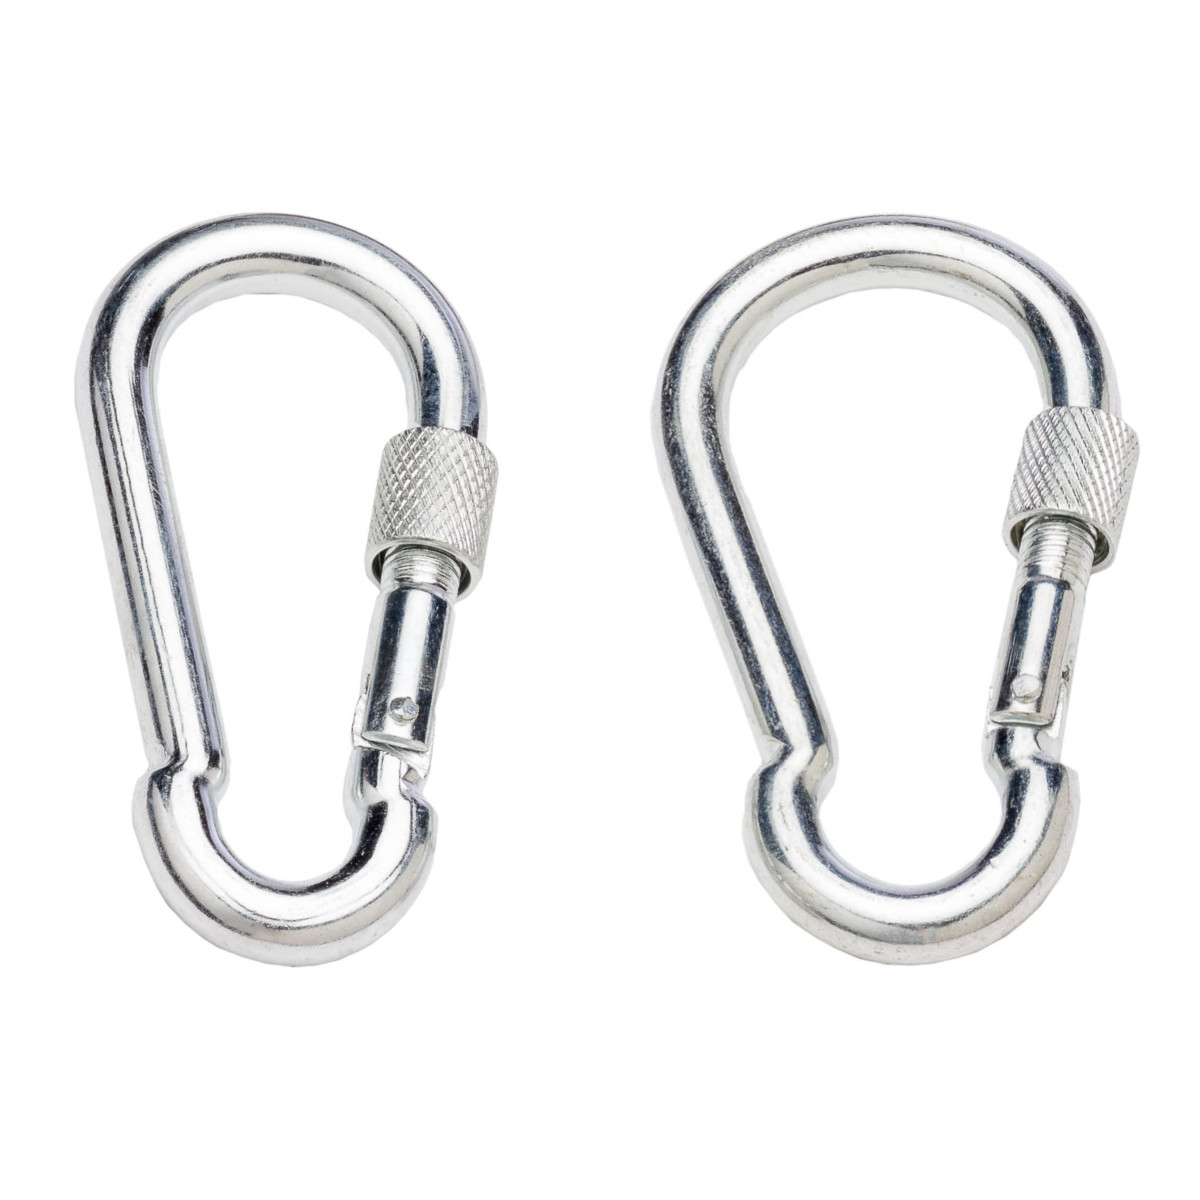 2x HARDWARE Spring Clip Snap Hooks Swing Seat Connector Playground Trapeze M36 